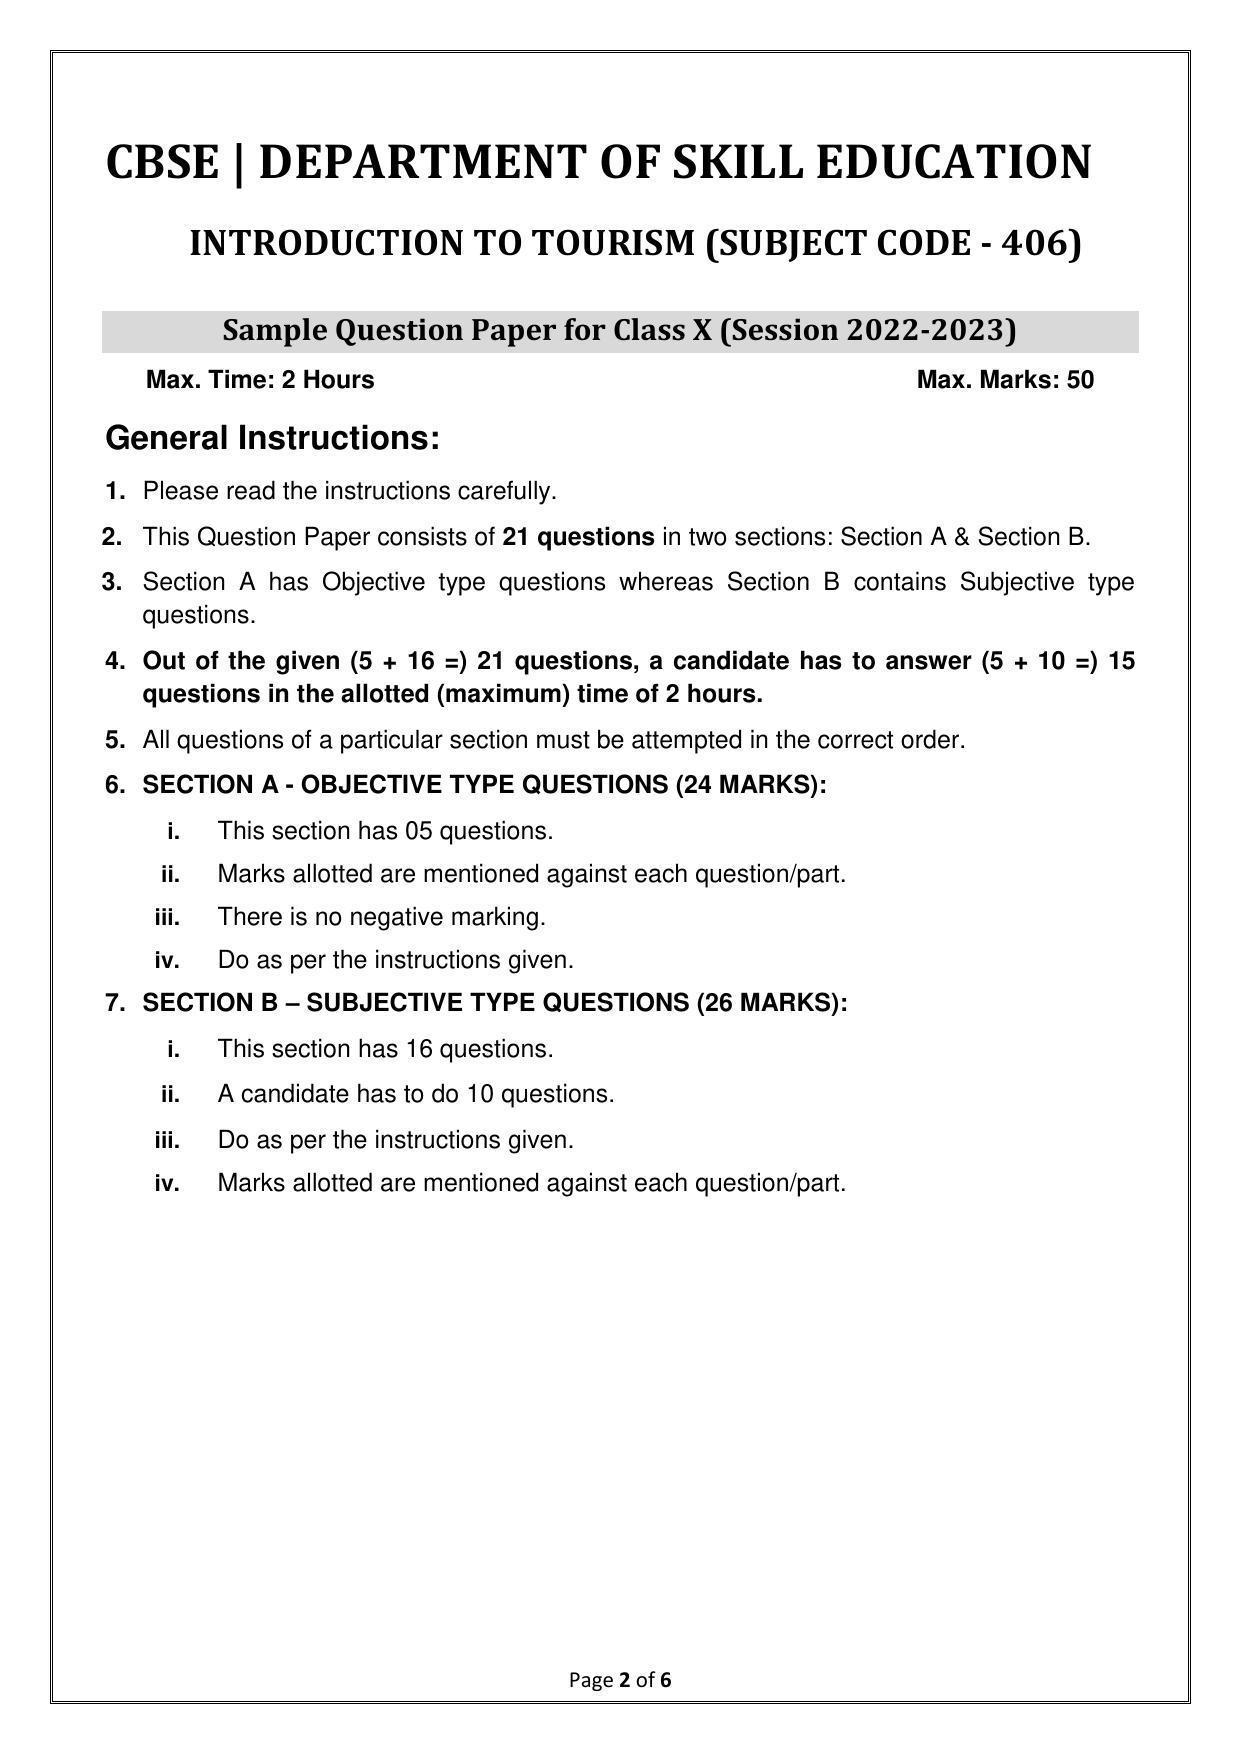 CBSE Class 10 (Skill Education) Introduction To Tourism Sample Papers 2023 - Page 2